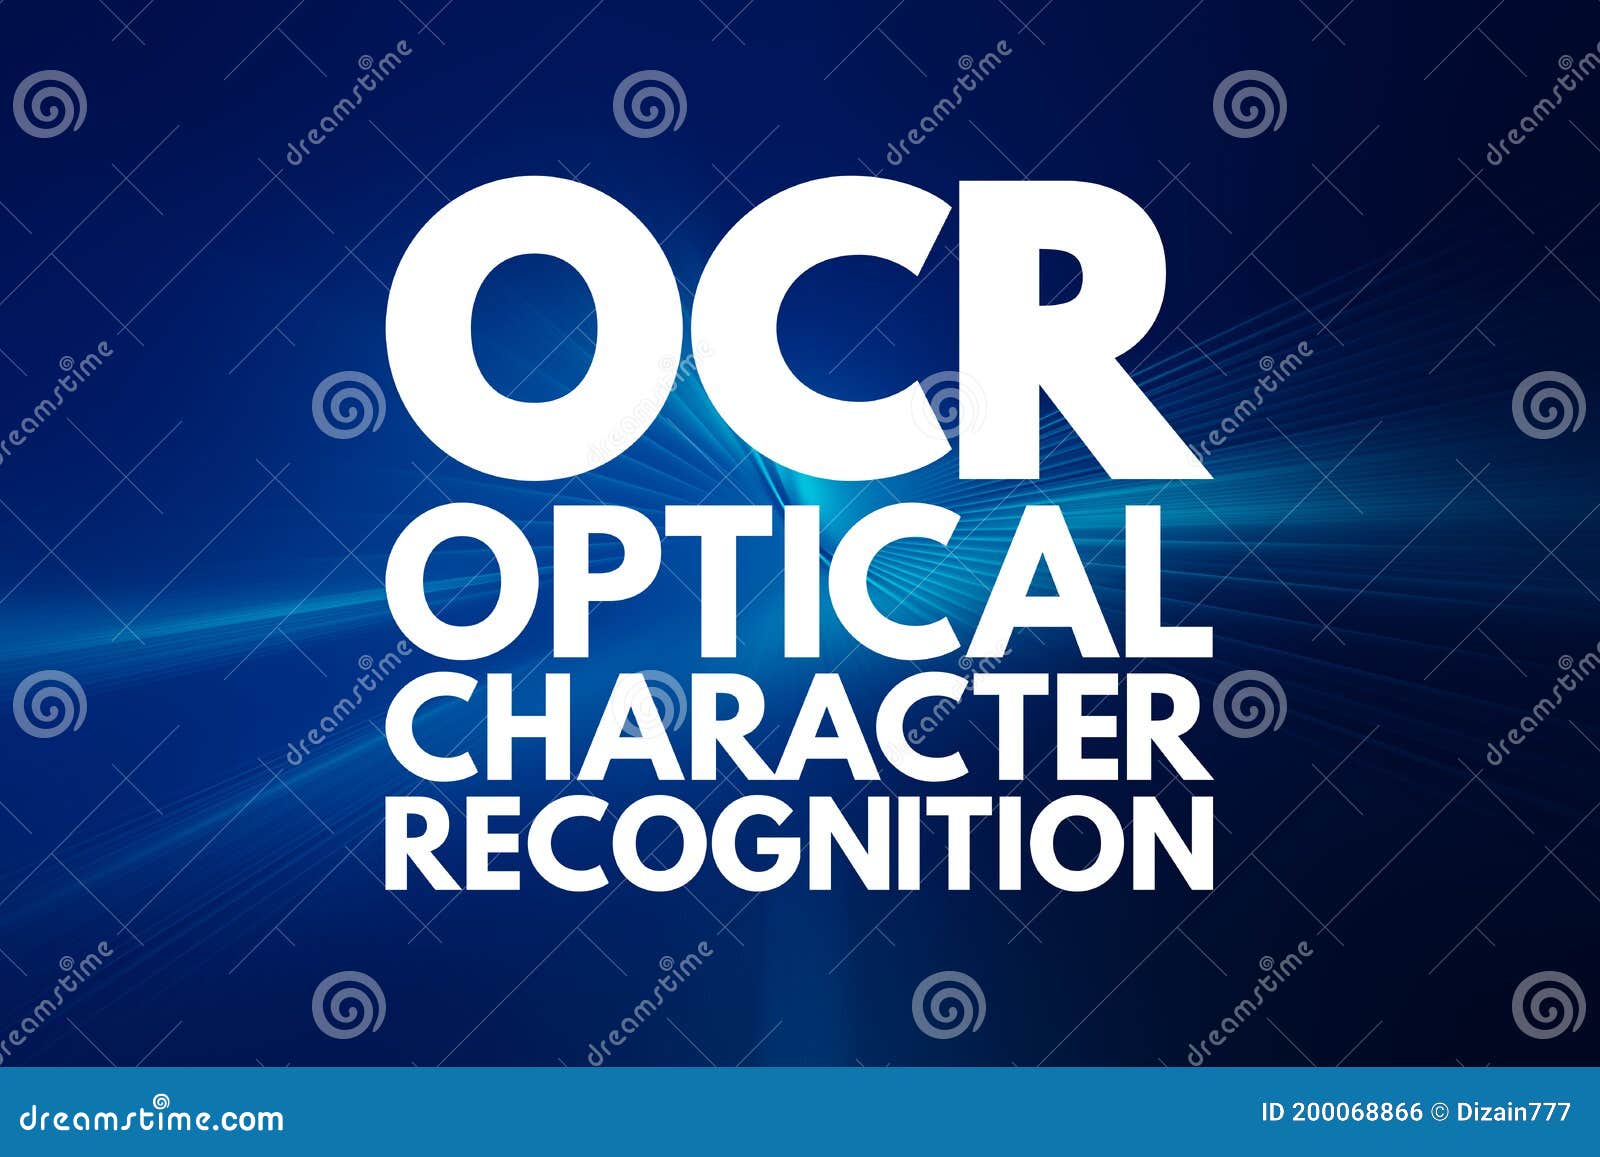 ocr - optical character recognition acronym, technology concept background